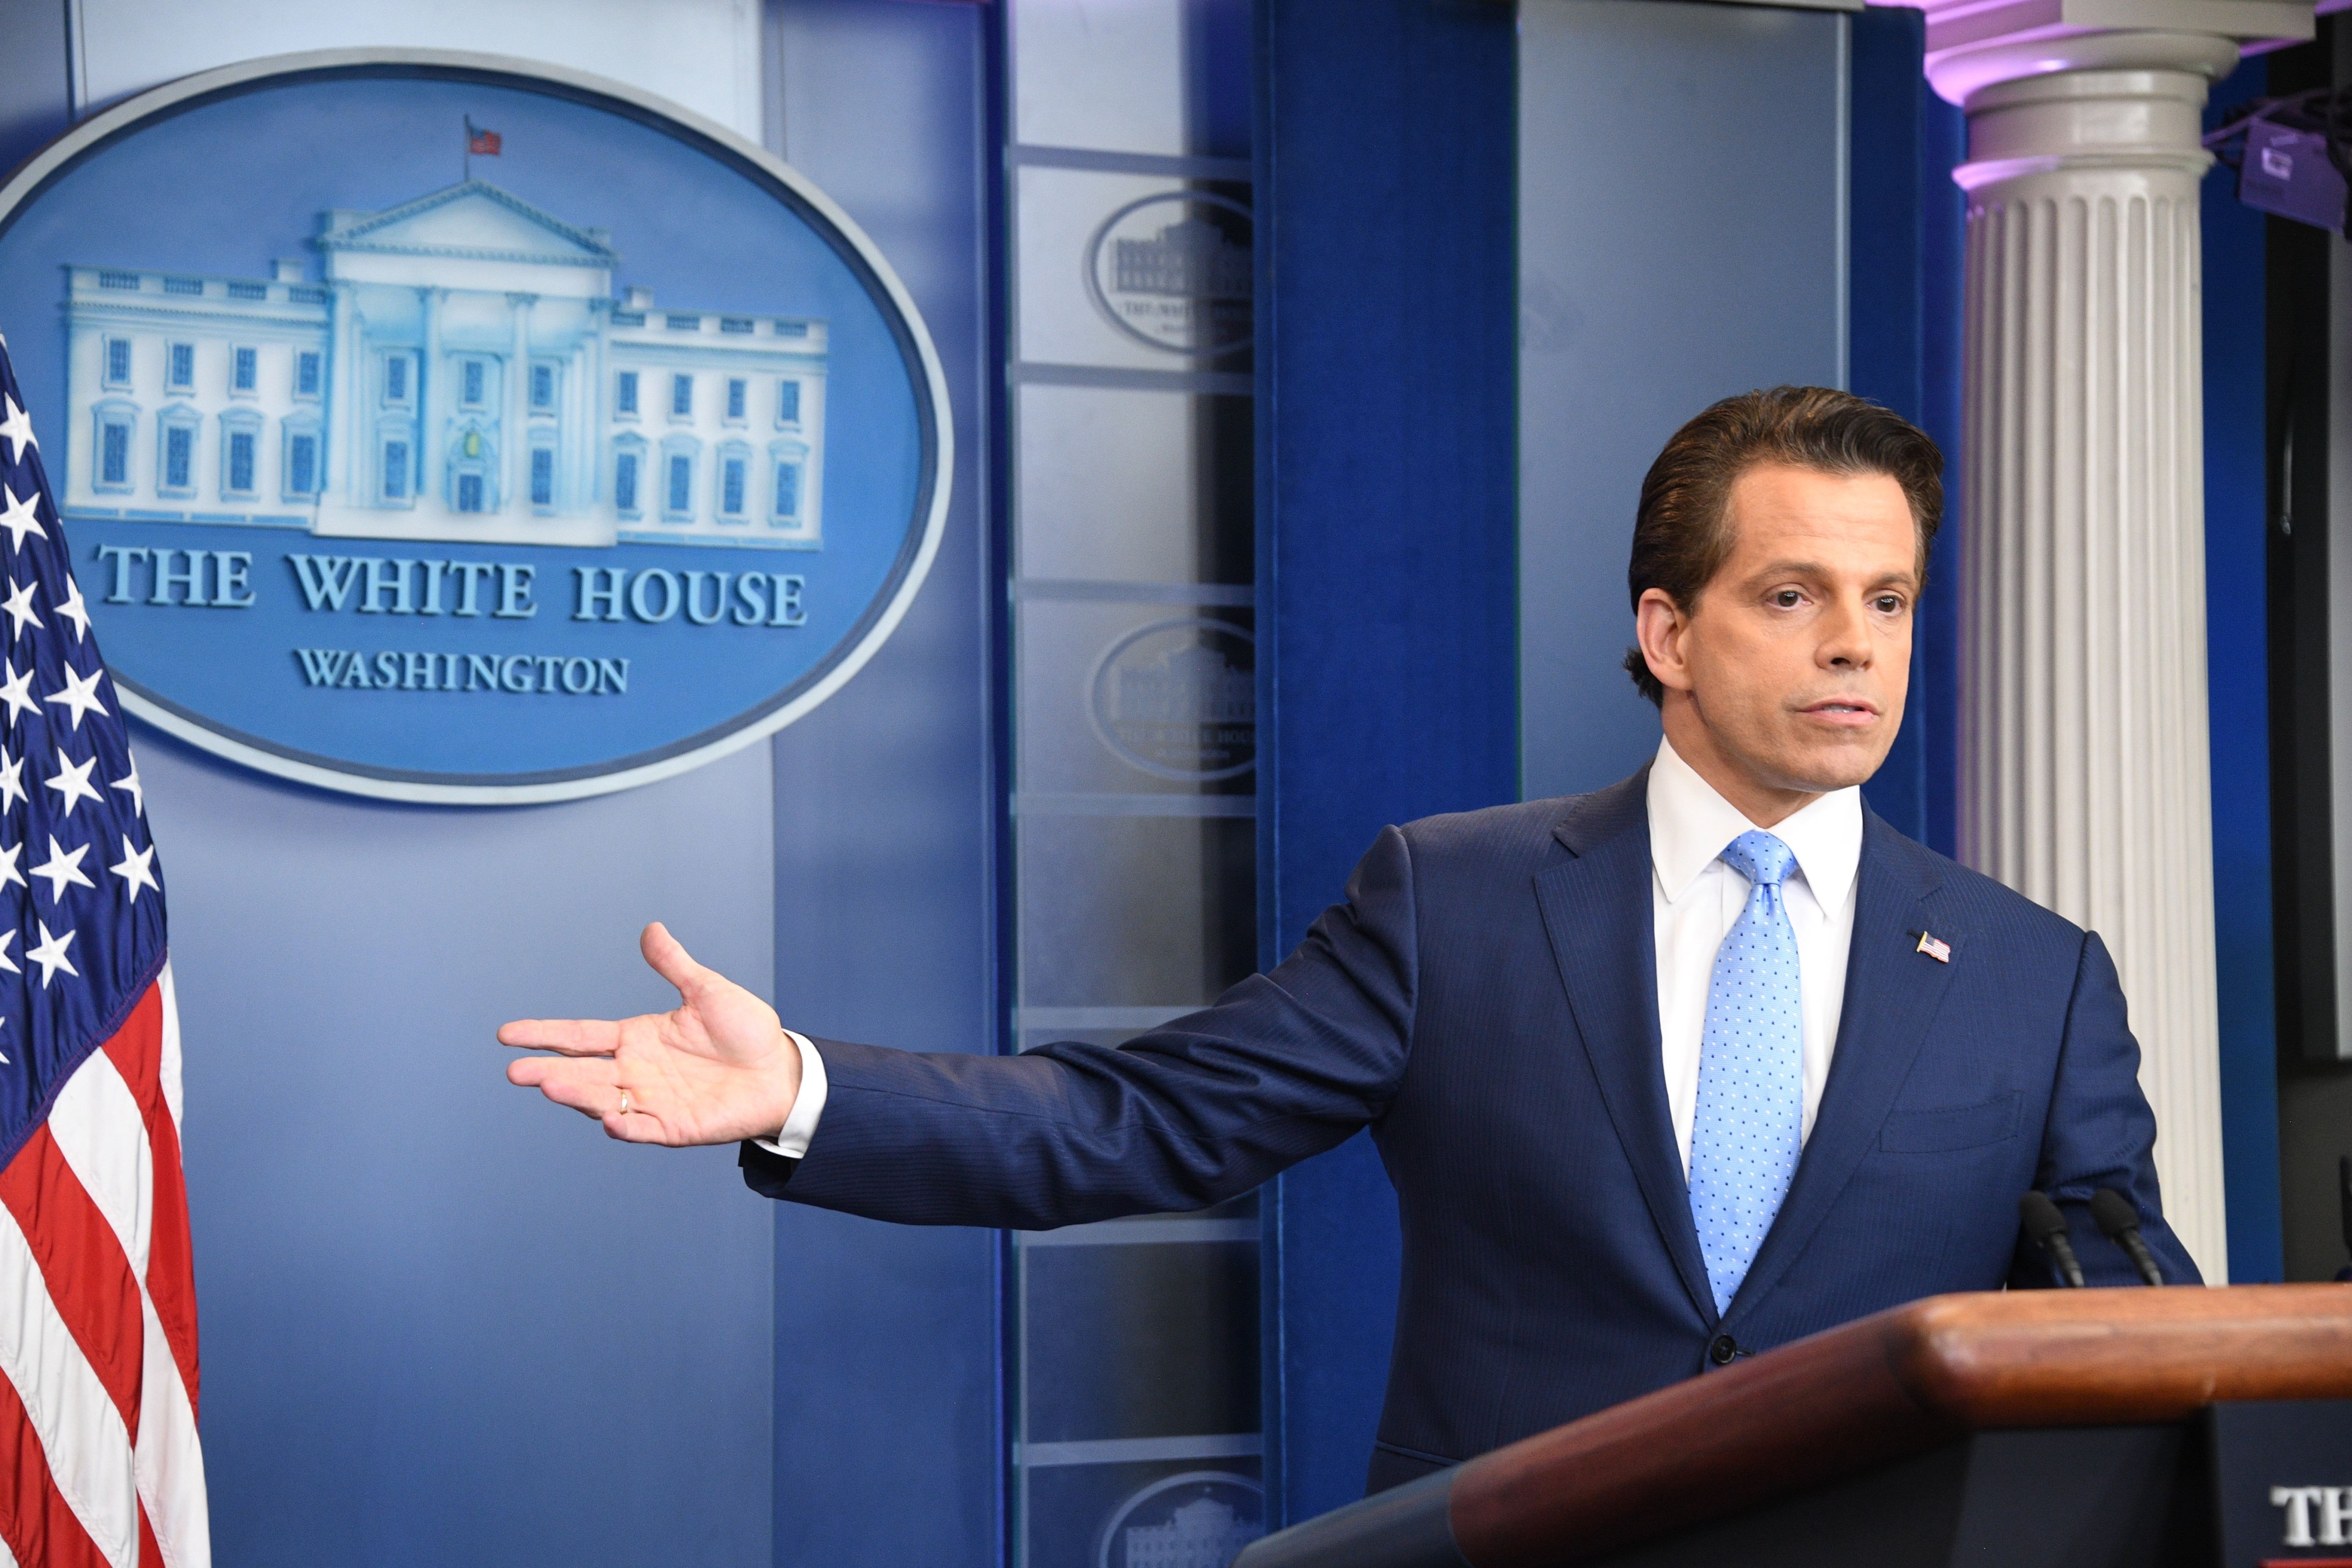 Anthony Scaramucci, who was briefly appointed White House communications director, speaks during a press briefing at the White House in Washington, D.C. on July 21, 2017. (Jm Watson—AFP/Getty Images)